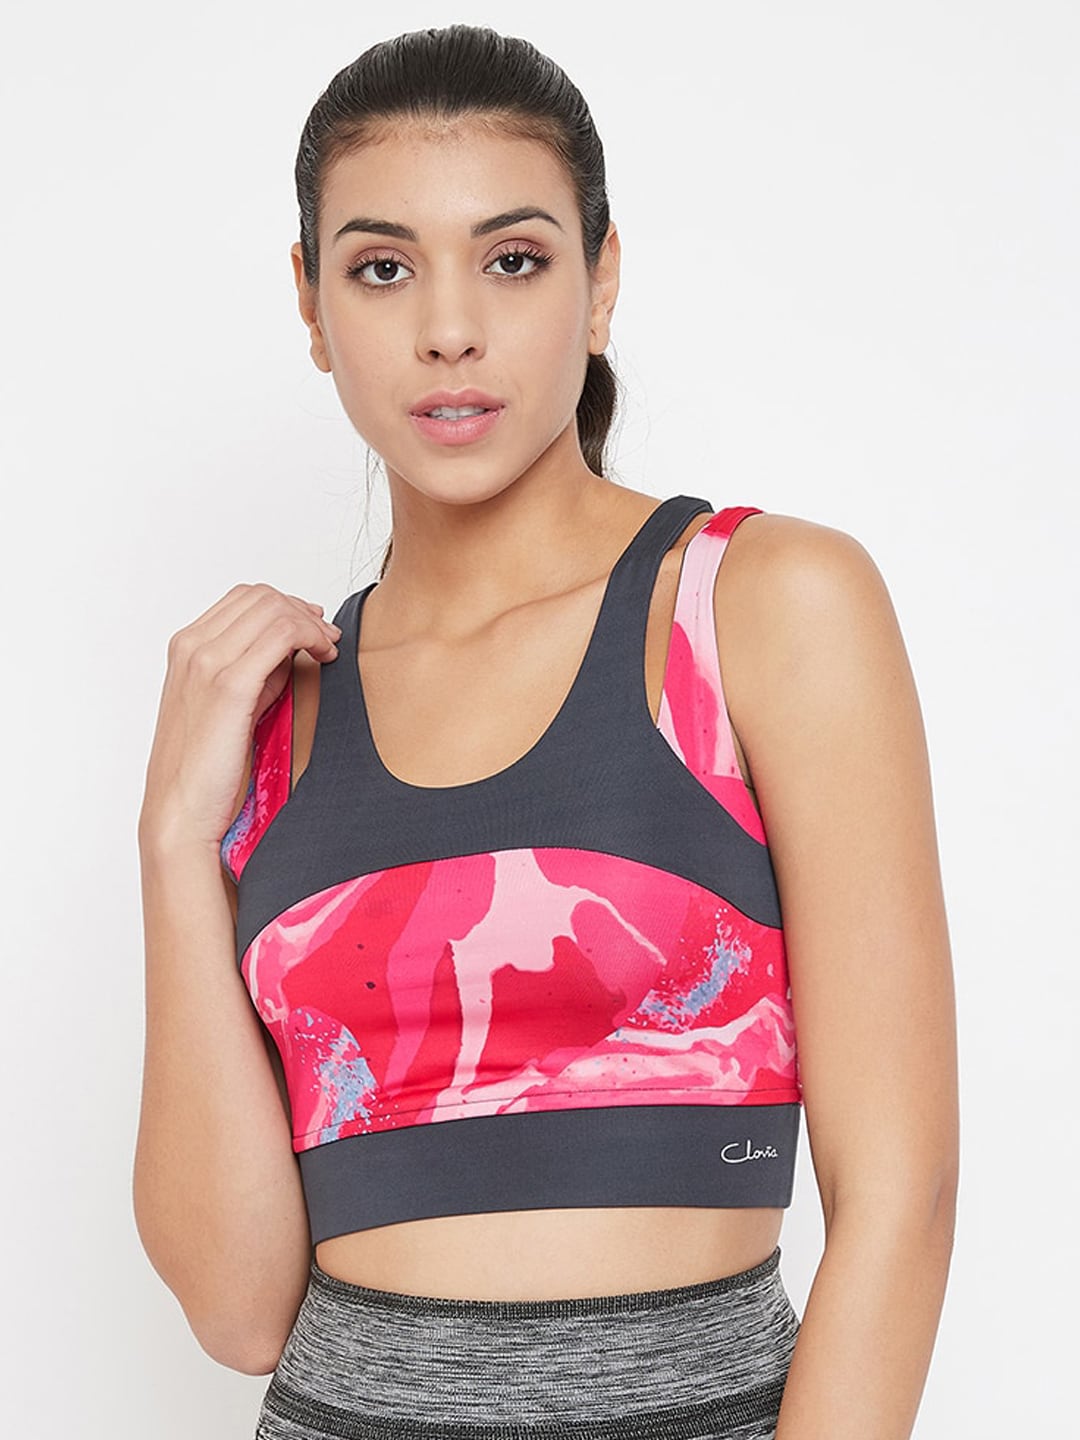 Clovia Pink Printed Non-Wired Full Coverage Lightly Padded Workout Bra BR2159P22XXL Price in India